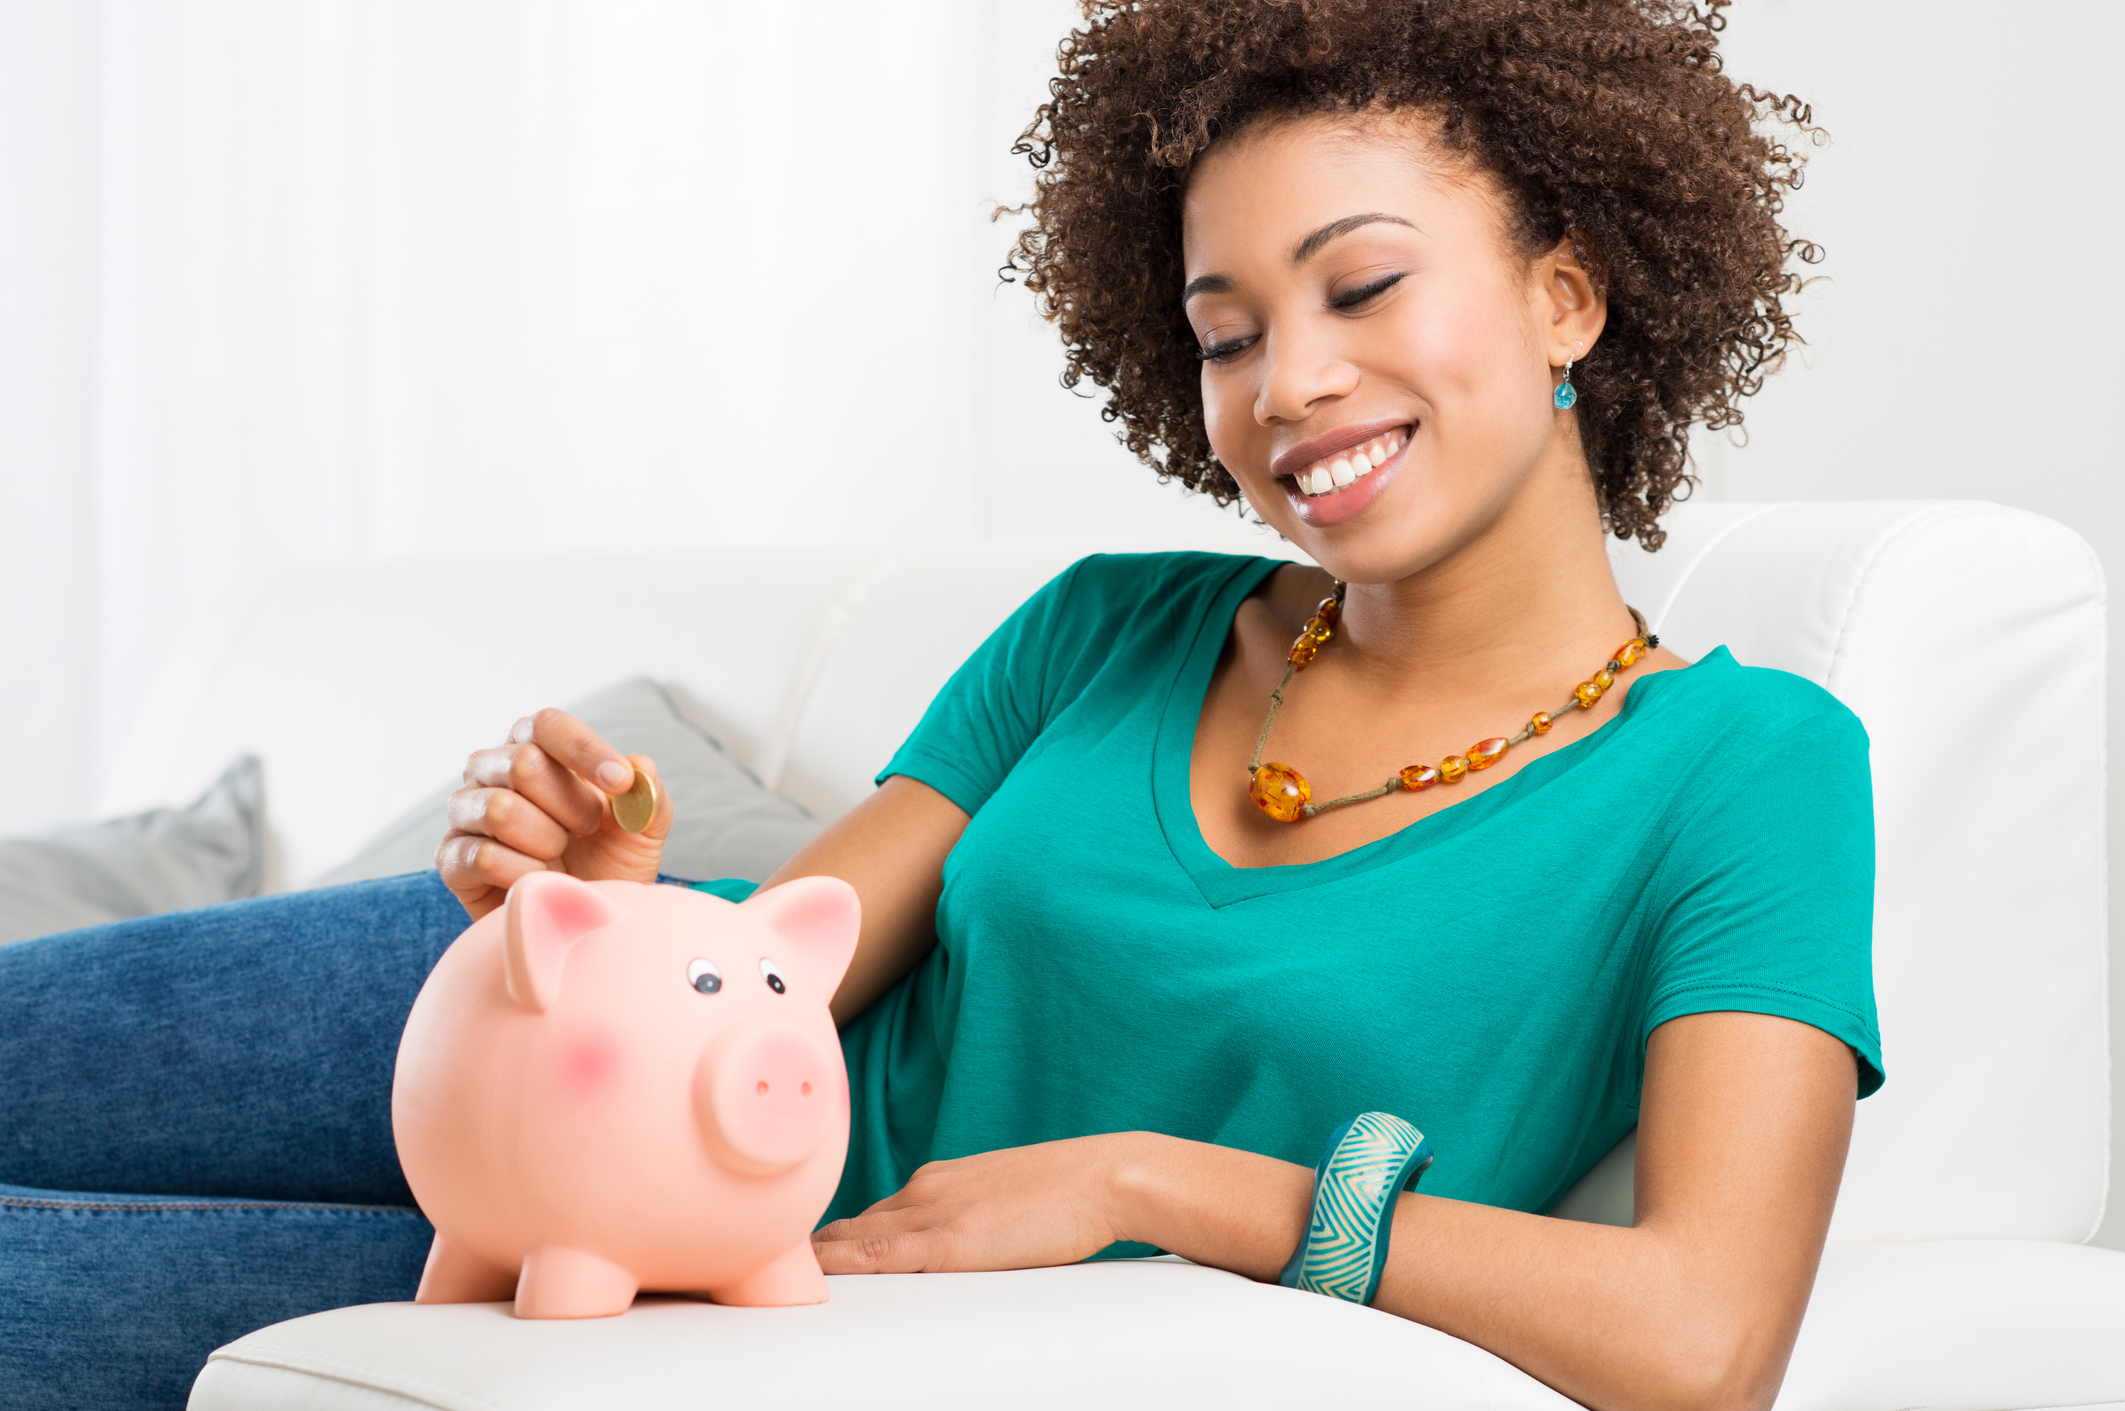 Young Girl Lying On Couch And Putting Coin In Piggybank